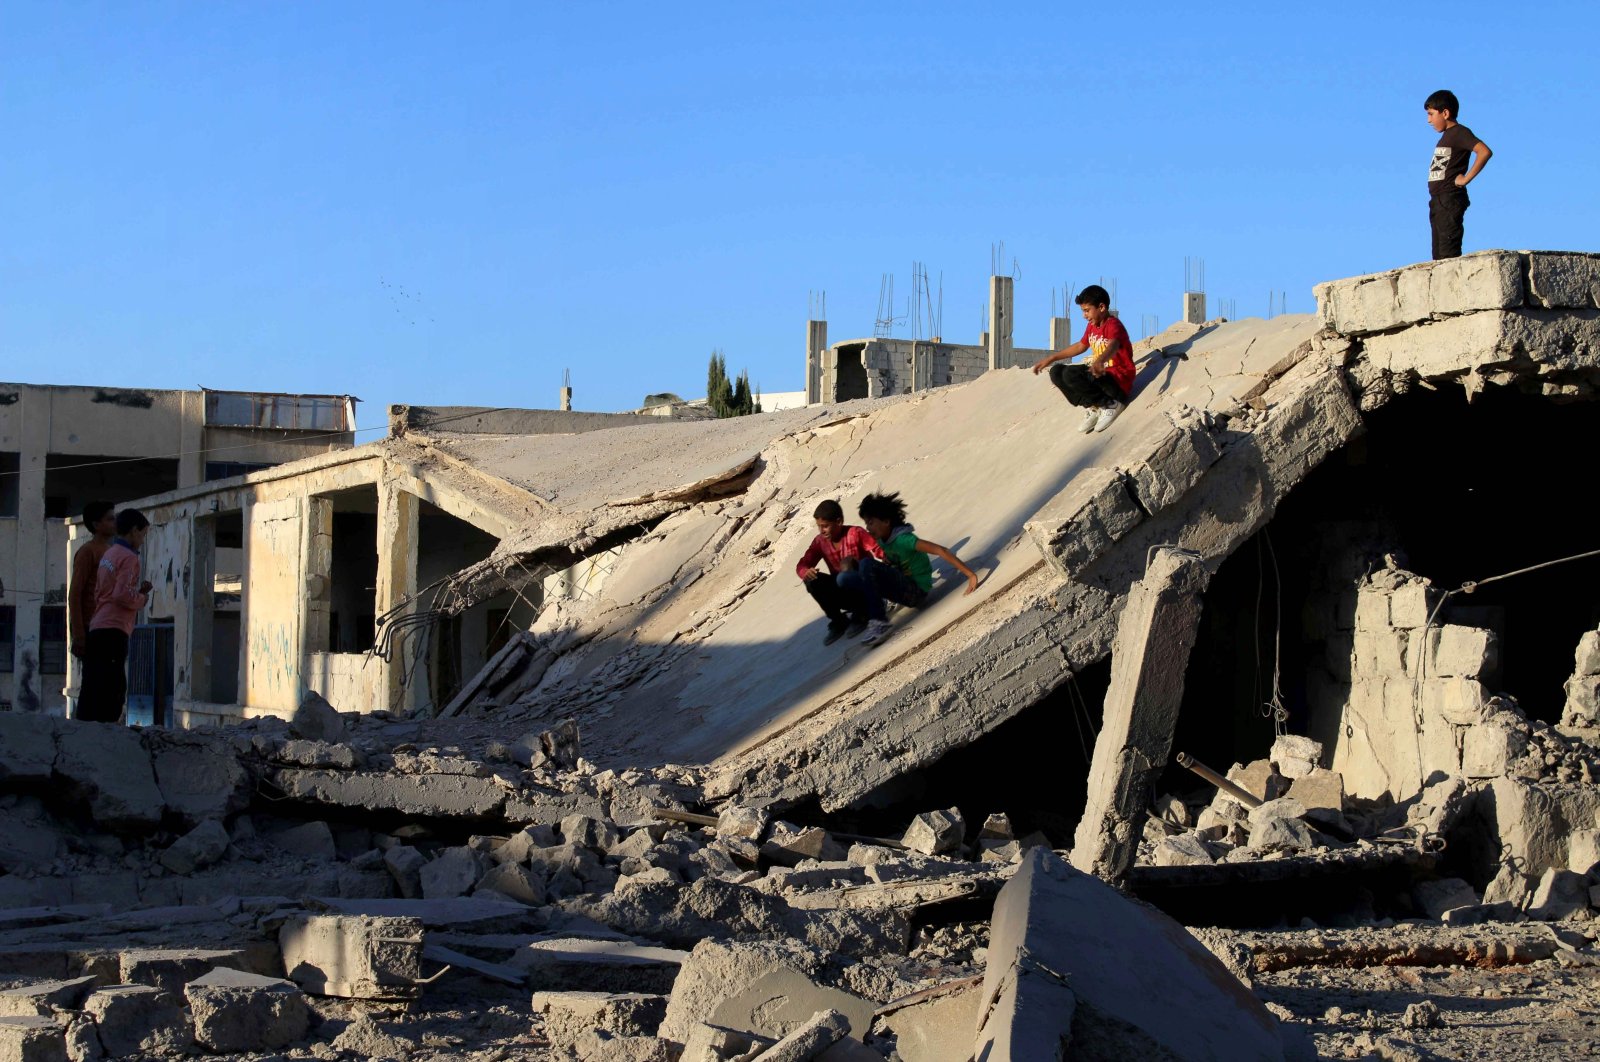 Palestinian Refugees Distressed following Violation of Deraa Reconciliation Agreement